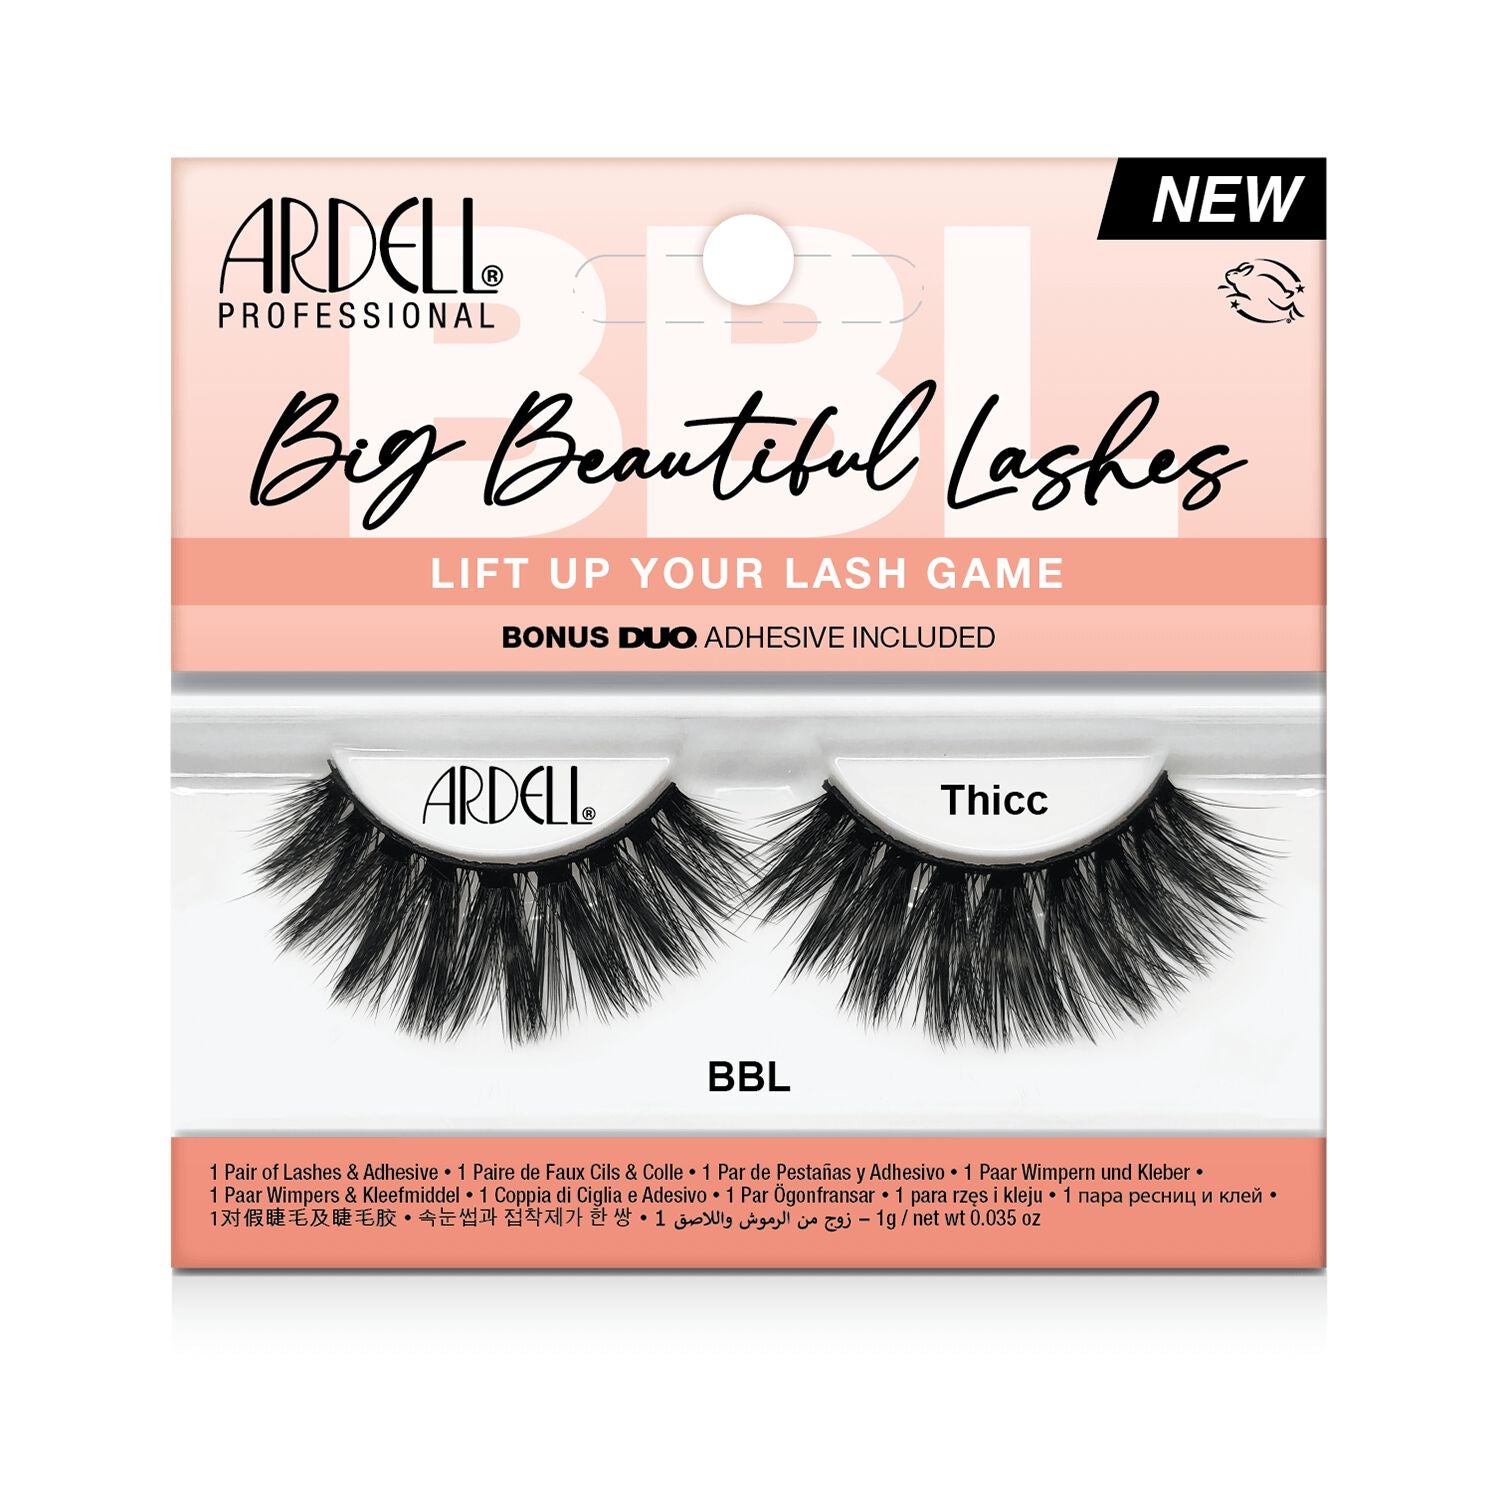 Big Beautiful Lashes  by   Ardell Thicc Big Beautiful Lashes